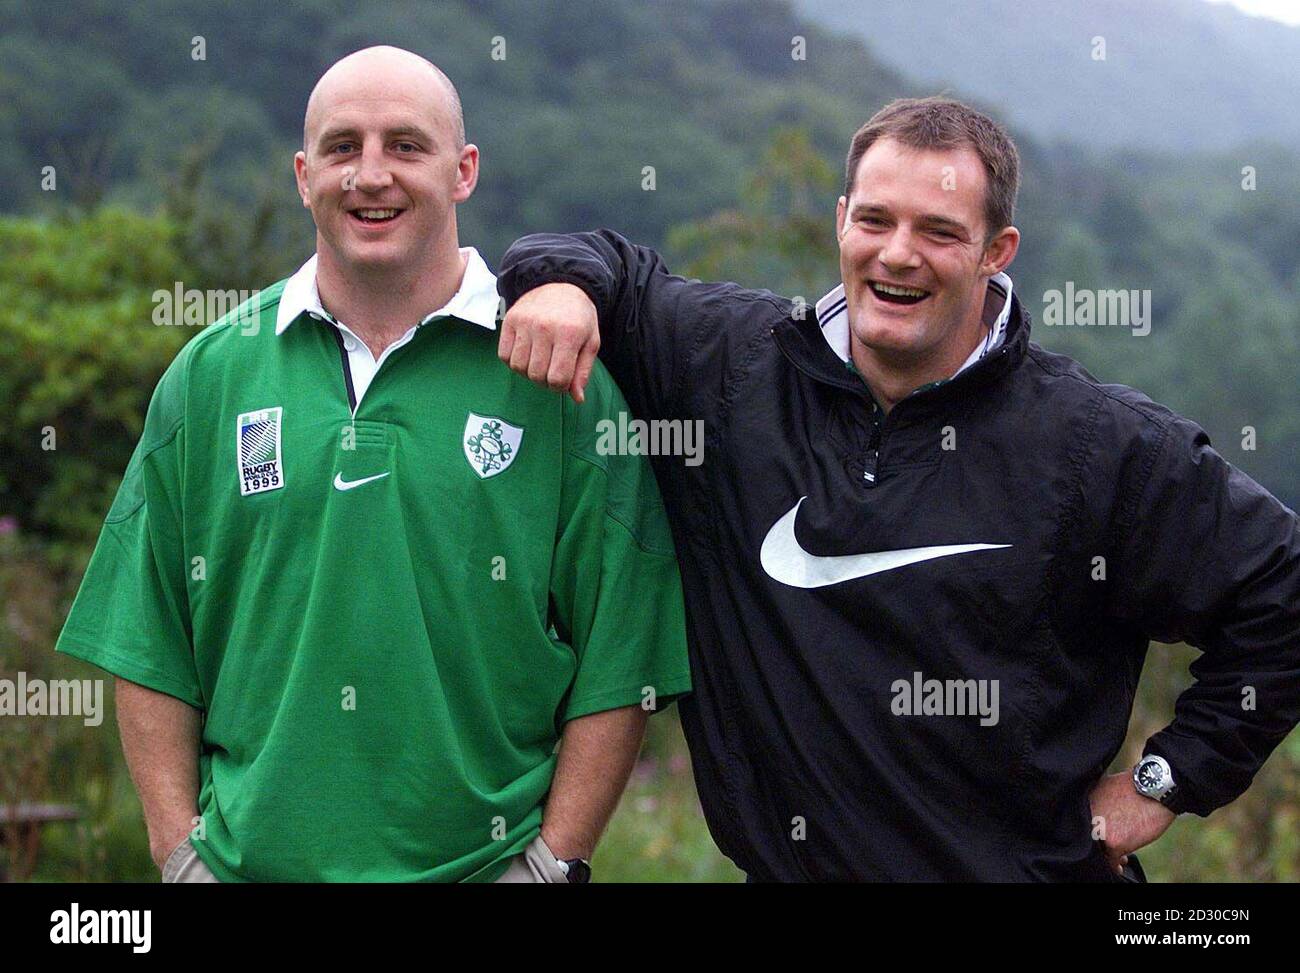 Rugby player Keith Woods (left) trying out the new Ireland Rugby World Cup strip with team mate Ross Nesdale, in advance of Ireland taking on Argentina in a friendly this Saturday at Lansdowne Road, Dublin.  Stock Photo